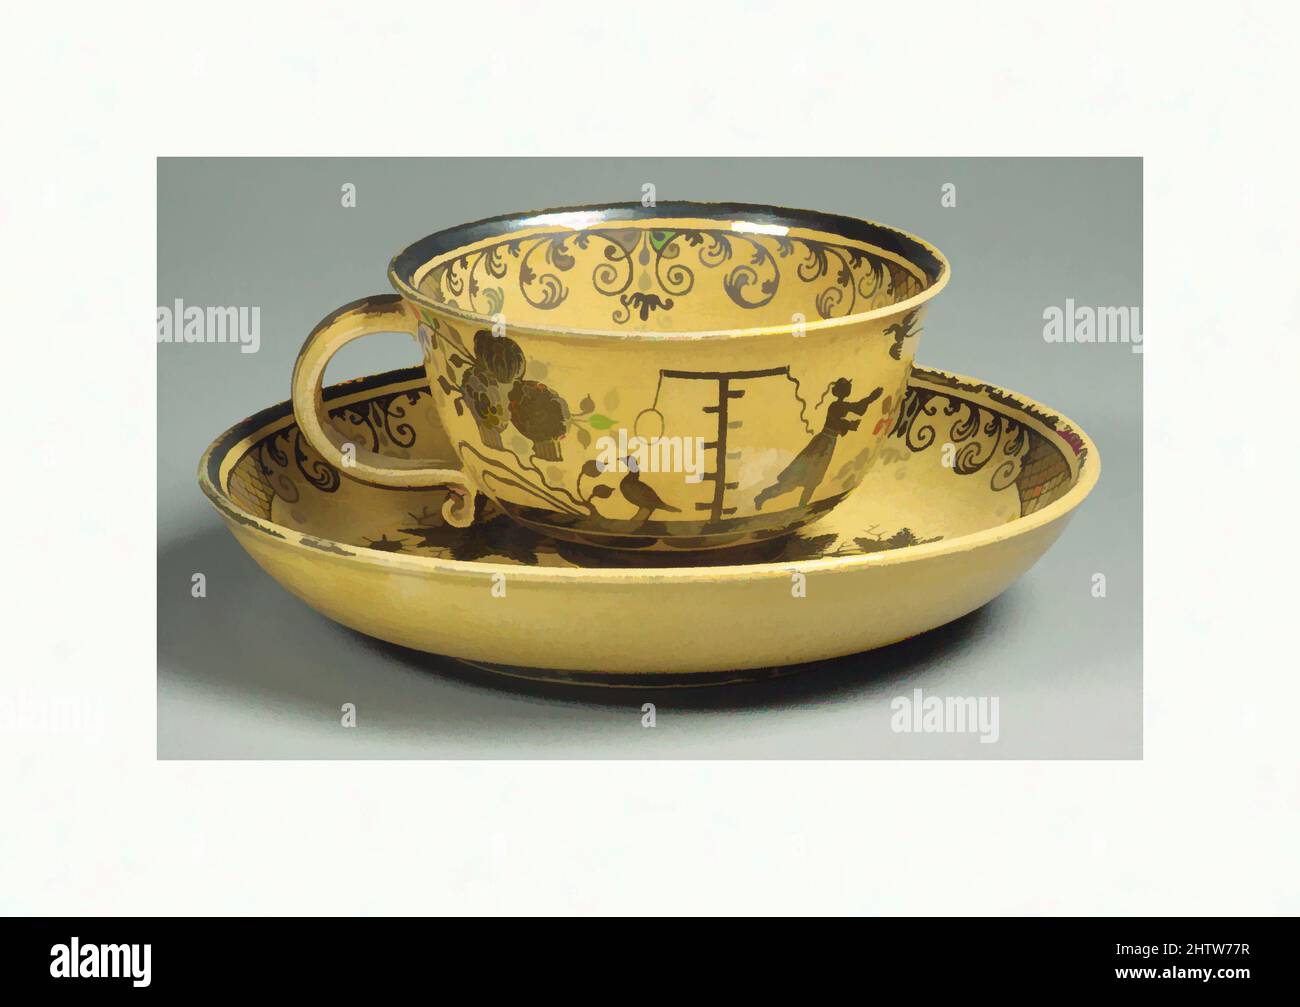 Art inspired by Cup and saucer, ca. 1730, German, Bayreuth, Tin-glazed earthenware, silvered, No dimensions recorded, Ceramics-Pottery, Classic works modernized by Artotop with a splash of modernity. Shapes, color and value, eye-catching visual impact on art. Emotions through freedom of artworks in a contemporary way. A timeless message pursuing a wildly creative new direction. Artists turning to the digital medium and creating the Artotop NFT Stock Photo